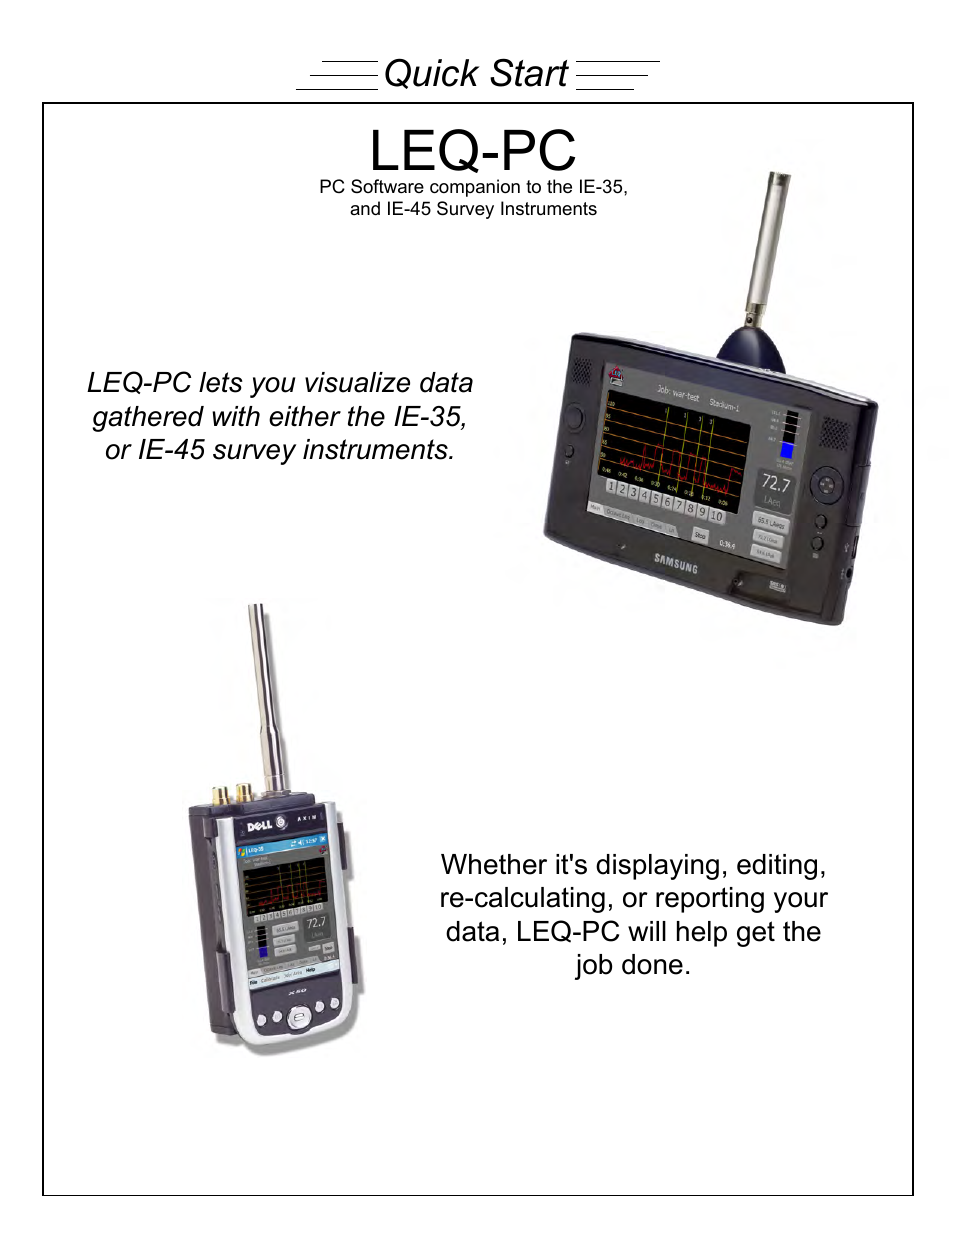 LEQ-PC -- Companion for Analysis on PC